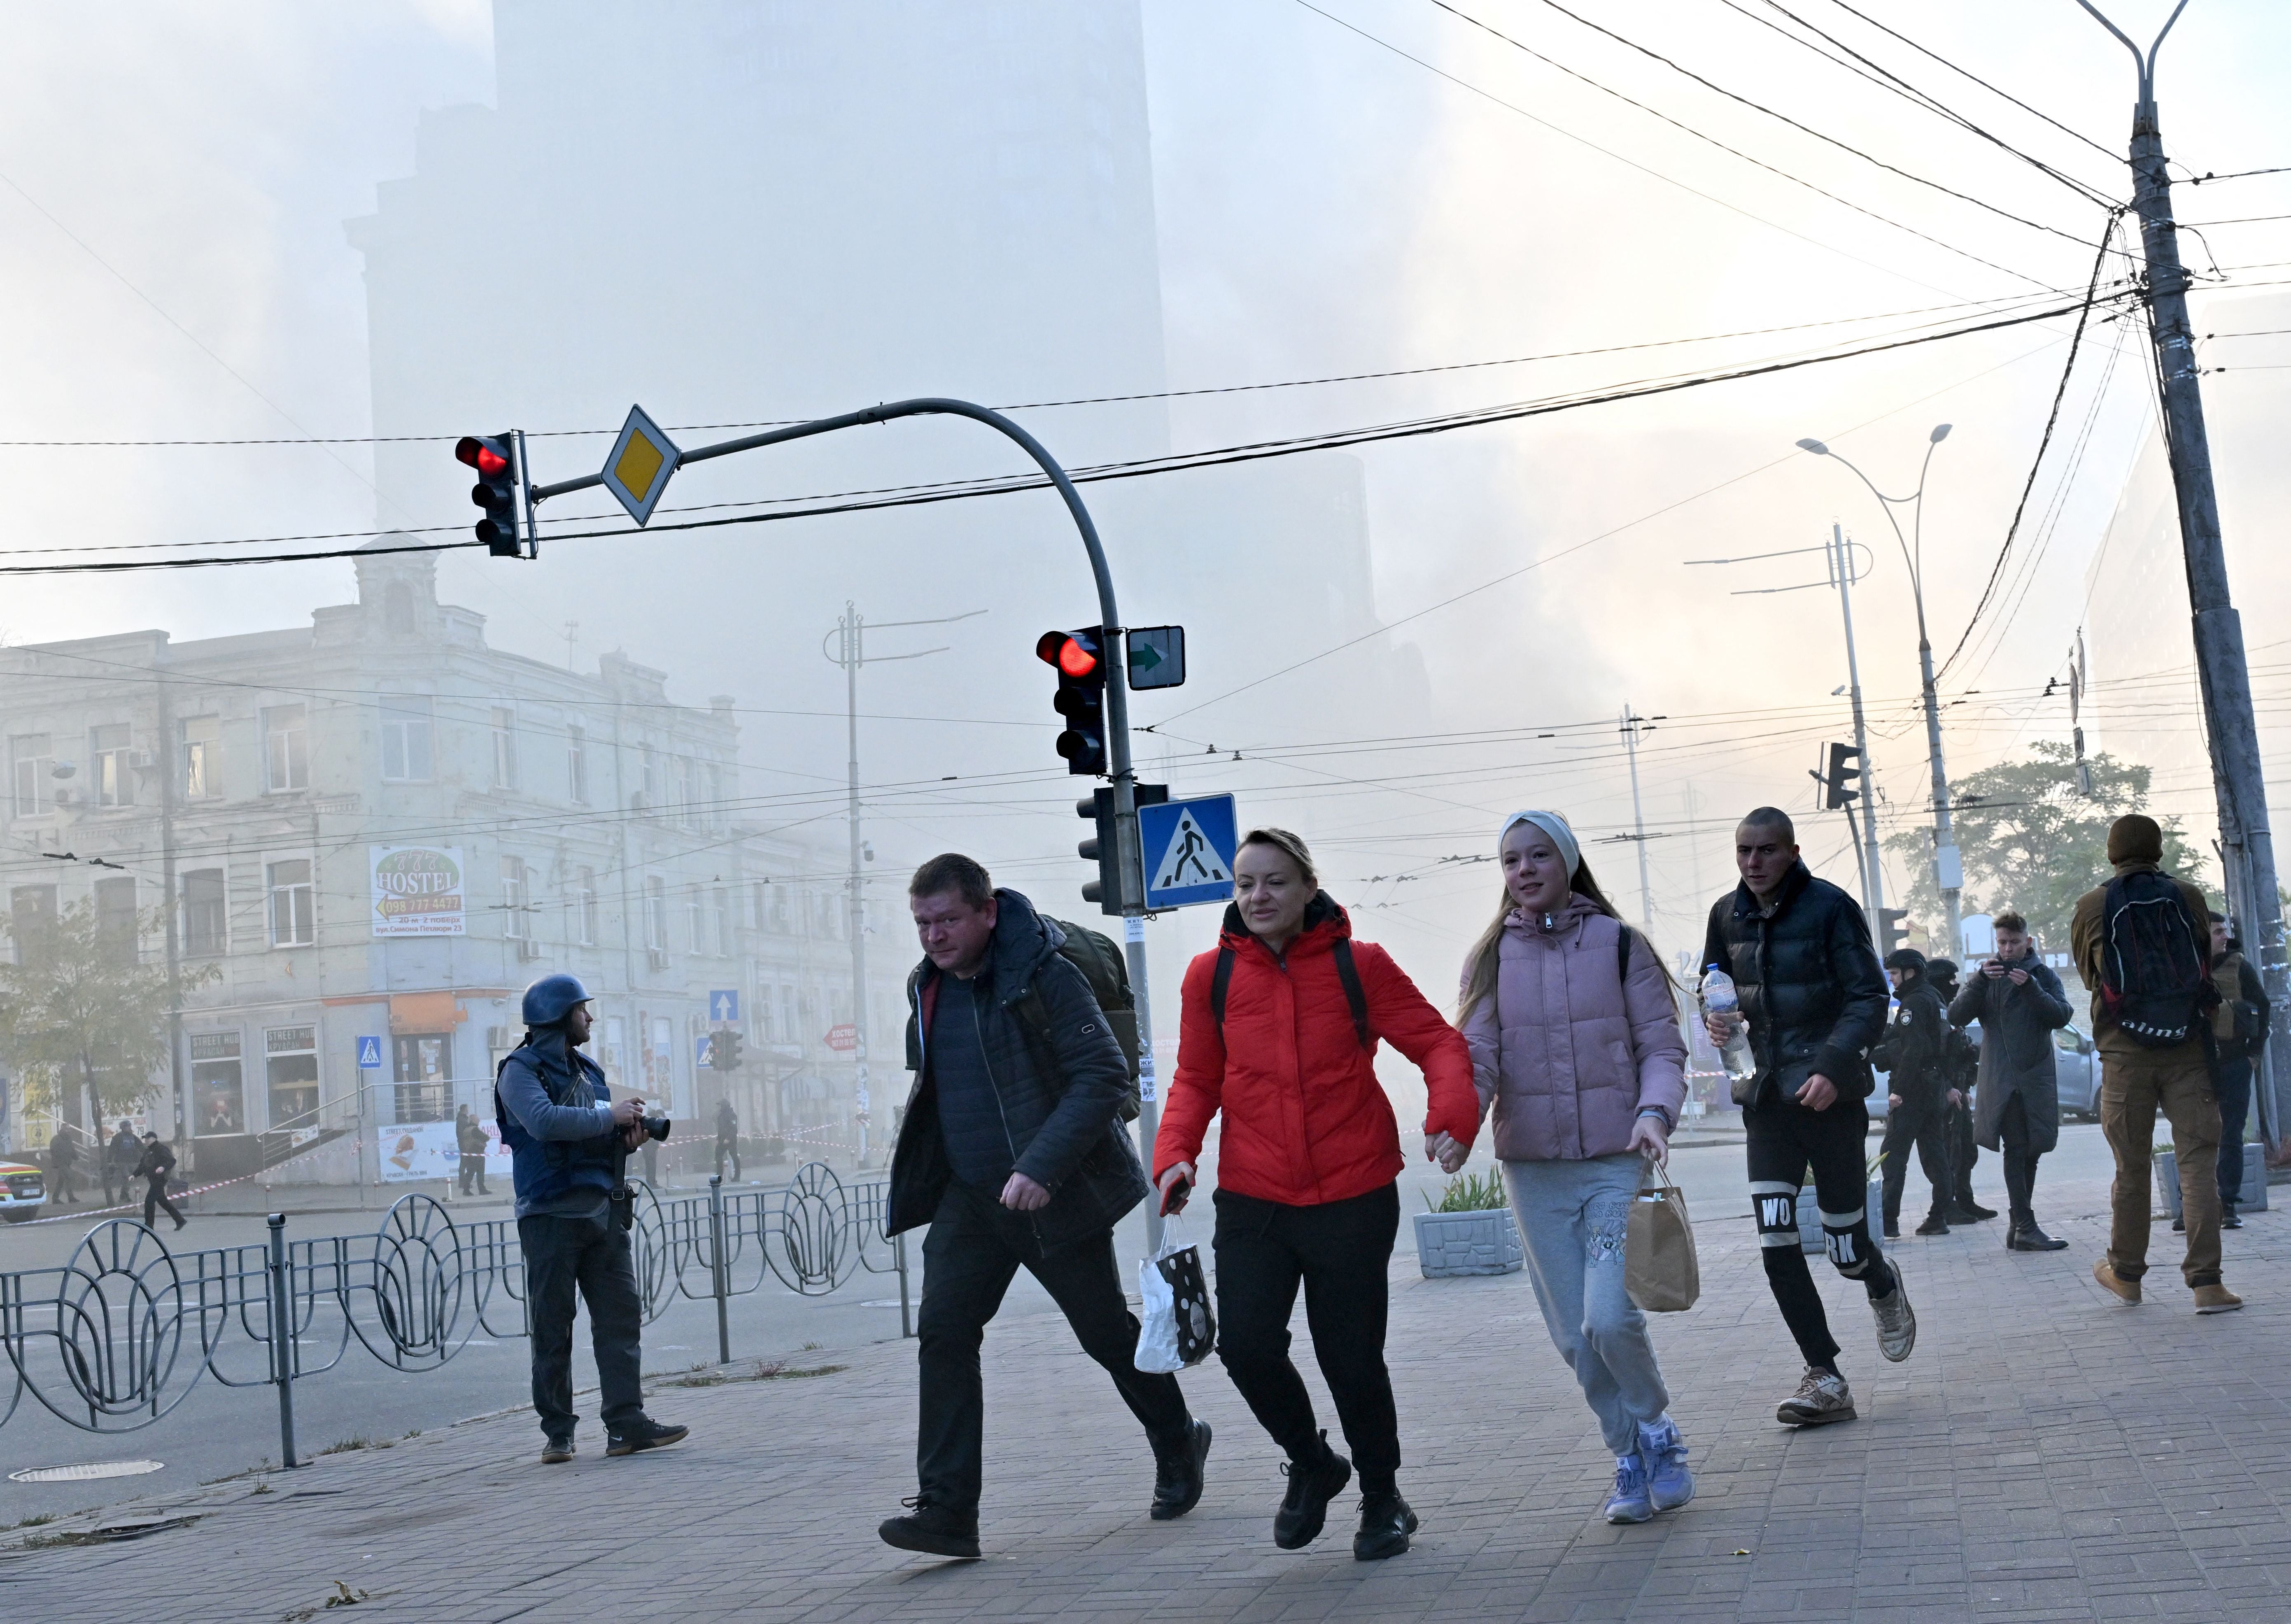 Local residents run away after a drone attack in Kyiv on October 17, 2022, amid the Russian invasion of Ukraine. (Photo: Sergei Supinsky / AFP, Getty Images)